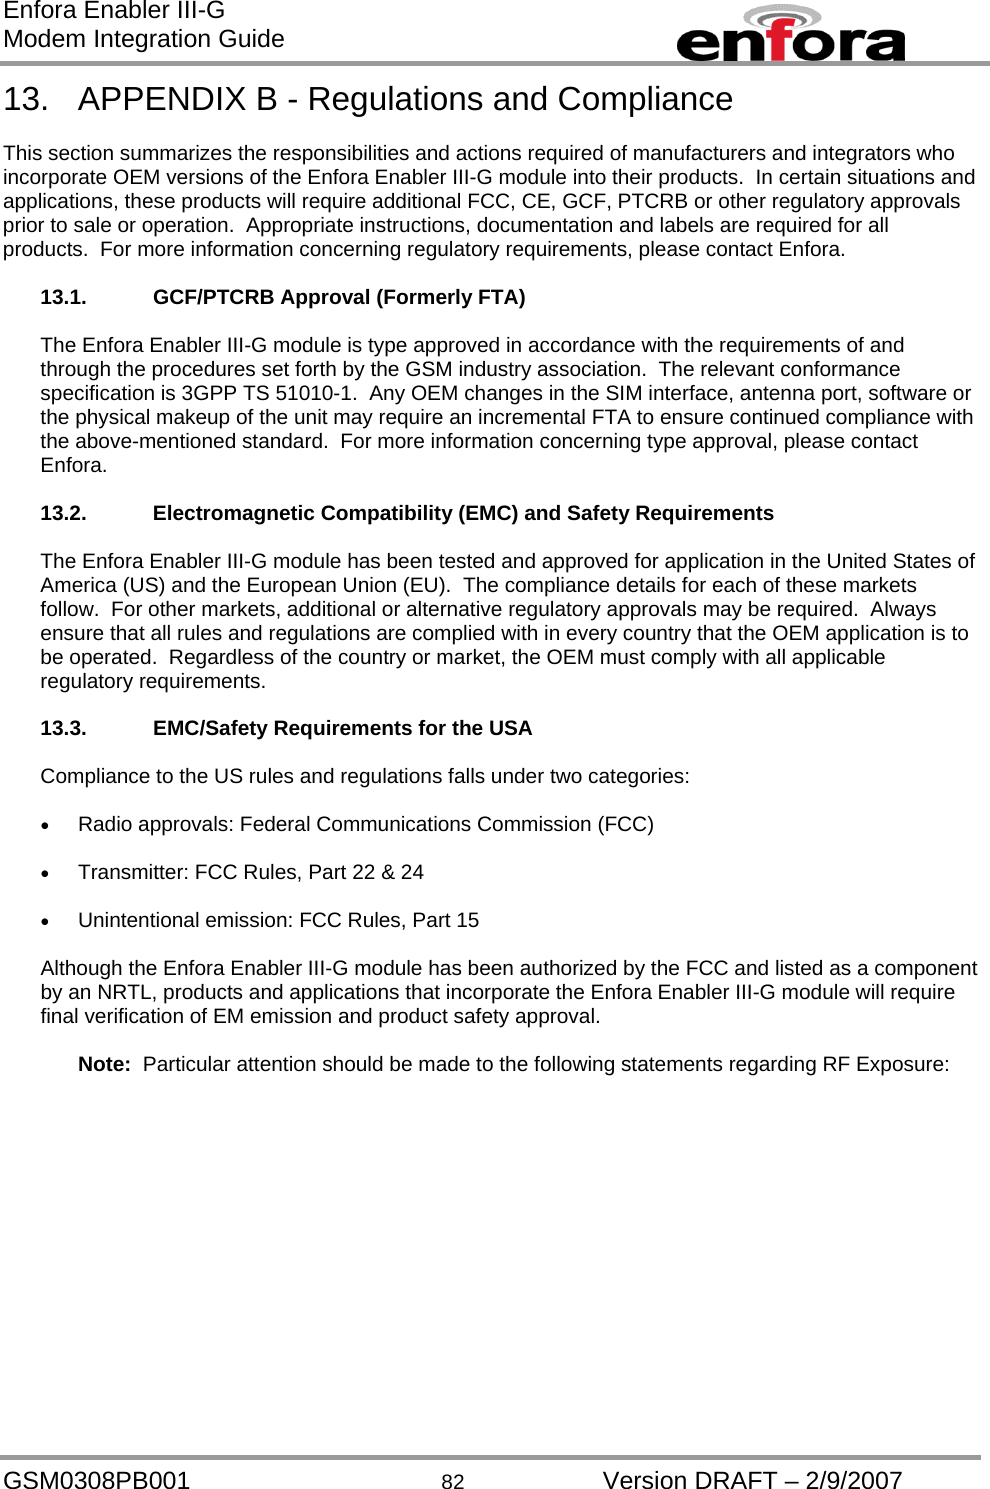 Enfora Enabler III-G Modem Integration Guide 13.  APPENDIX B - Regulations and Compliance  This section summarizes the responsibilities and actions required of manufacturers and integrators who incorporate OEM versions of the Enfora Enabler III-G module into their products.  In certain situations and applications, these products will require additional FCC, CE, GCF, PTCRB or other regulatory approvals prior to sale or operation.  Appropriate instructions, documentation and labels are required for all products.  For more information concerning regulatory requirements, please contact Enfora.  13.1.  GCF/PTCRB Approval (Formerly FTA)  The Enfora Enabler III-G module is type approved in accordance with the requirements of and through the procedures set forth by the GSM industry association.  The relevant conformance specification is 3GPP TS 51010-1.  Any OEM changes in the SIM interface, antenna port, software or the physical makeup of the unit may require an incremental FTA to ensure continued compliance with the above-mentioned standard.  For more information concerning type approval, please contact Enfora.  13.2. Electromagnetic Compatibility (EMC) and Safety Requirements  The Enfora Enabler III-G module has been tested and approved for application in the United States of America (US) and the European Union (EU).  The compliance details for each of these markets follow.  For other markets, additional or alternative regulatory approvals may be required.  Always ensure that all rules and regulations are complied with in every country that the OEM application is to be operated.  Regardless of the country or market, the OEM must comply with all applicable regulatory requirements.  13.3.  EMC/Safety Requirements for the USA  Compliance to the US rules and regulations falls under two categories:  •  Radio approvals: Federal Communications Commission (FCC)  •  Transmitter: FCC Rules, Part 22 &amp; 24  •  Unintentional emission: FCC Rules, Part 15  Although the Enfora Enabler III-G module has been authorized by the FCC and listed as a component by an NRTL, products and applications that incorporate the Enfora Enabler III-G module will require final verification of EM emission and product safety approval.  Note:  Particular attention should be made to the following statements regarding RF Exposure: GSM0308PB001  82  Version DRAFT – 2/9/2007 